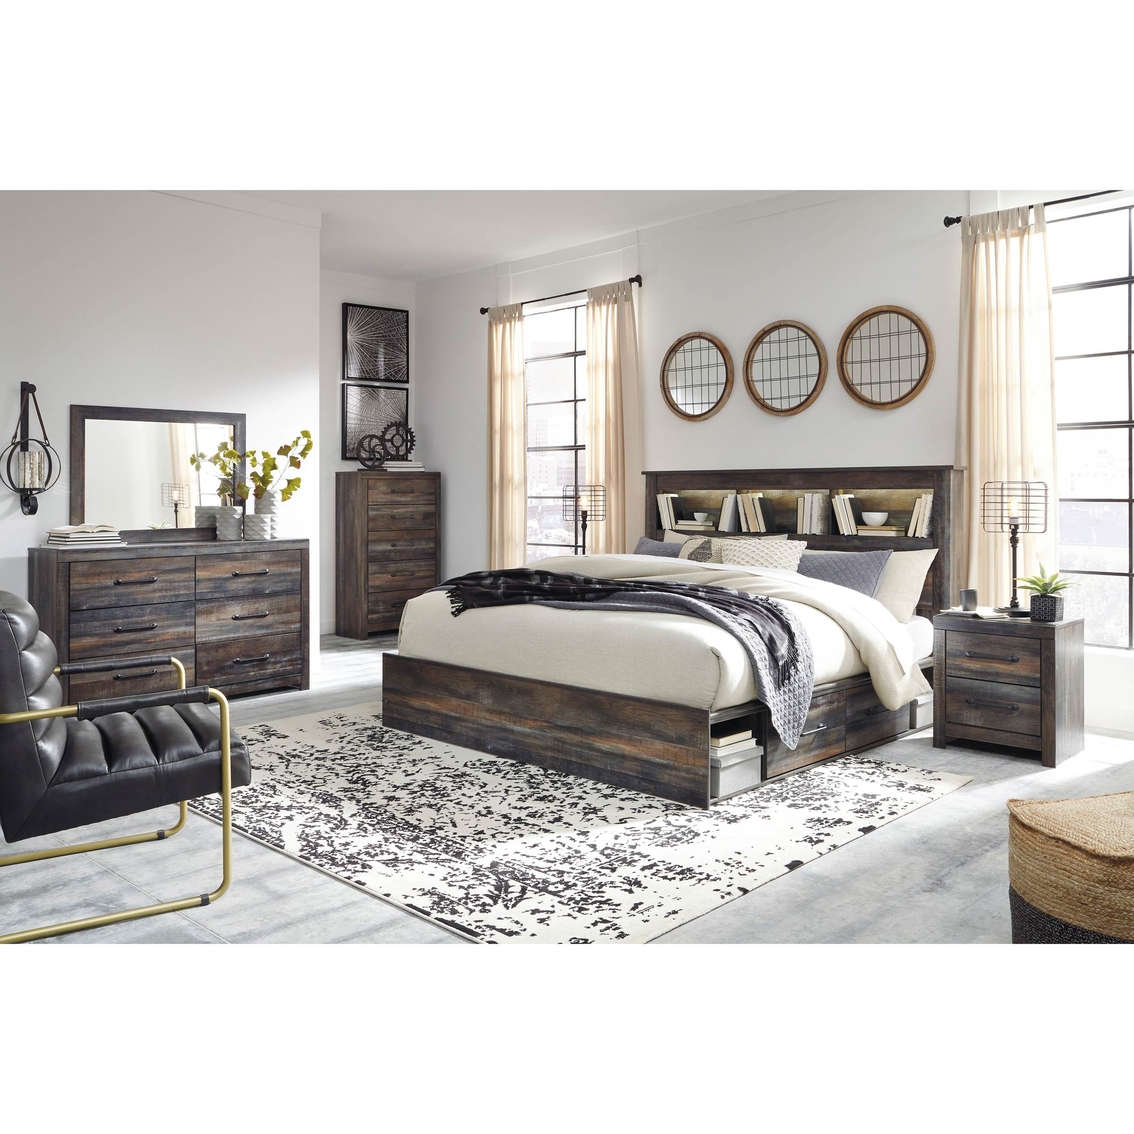 Signature Design by Ashley Drystan Bookcase Headboard Bed with 1 Side Storage - Image 5 of 5